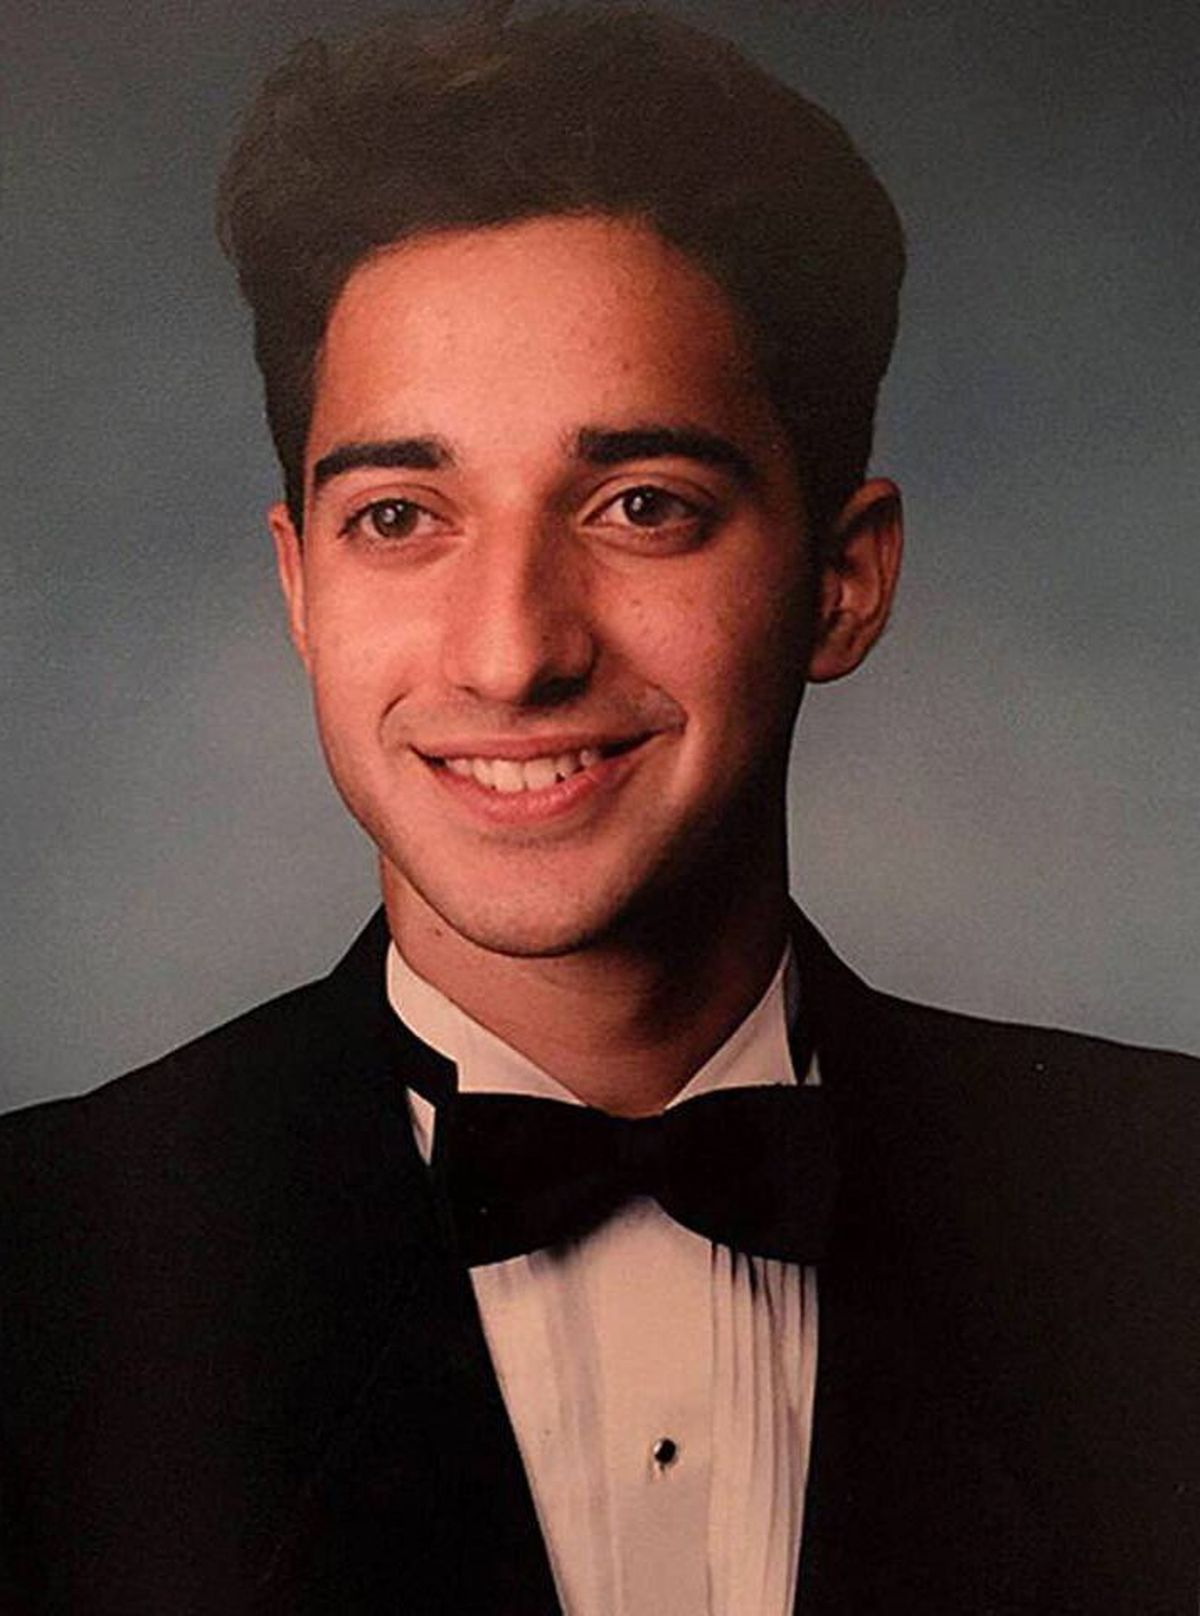 Syed in 1999 